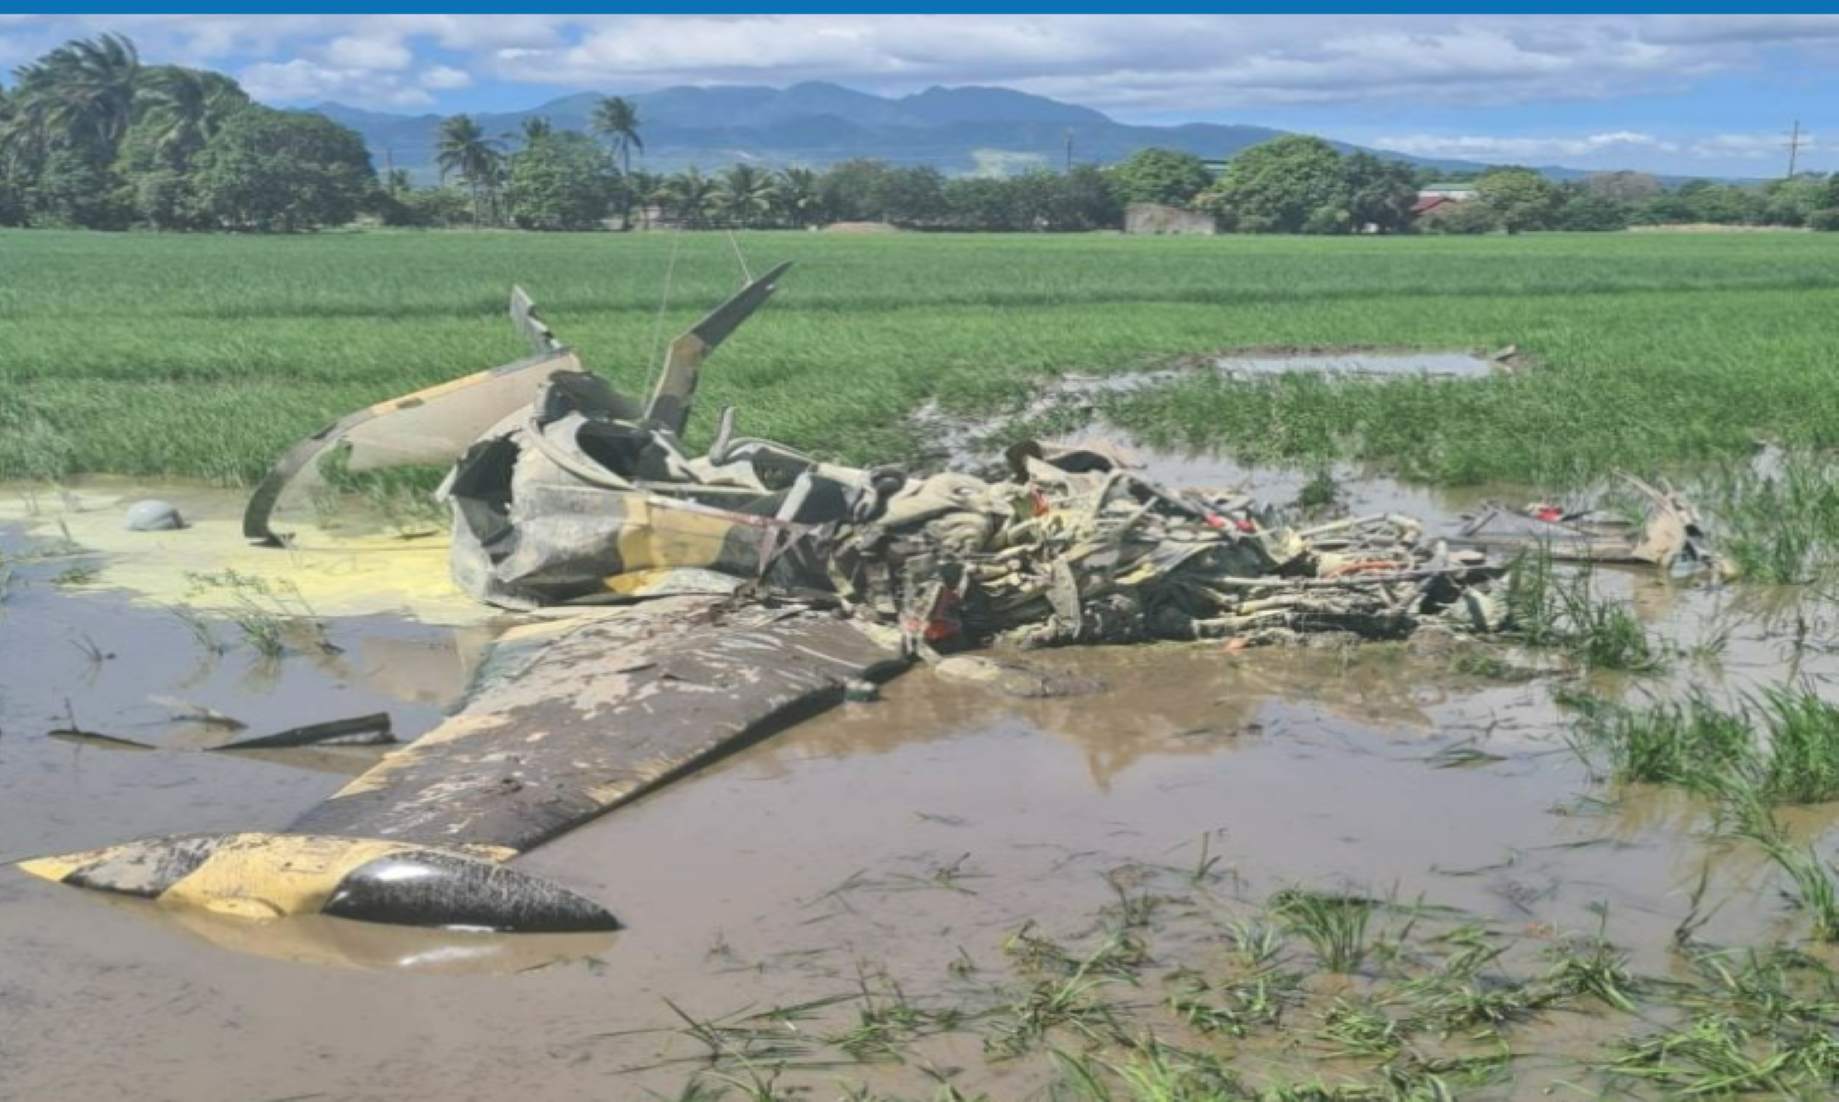 Philippine Air Force Plane Crashed In Philippines, Two Dead